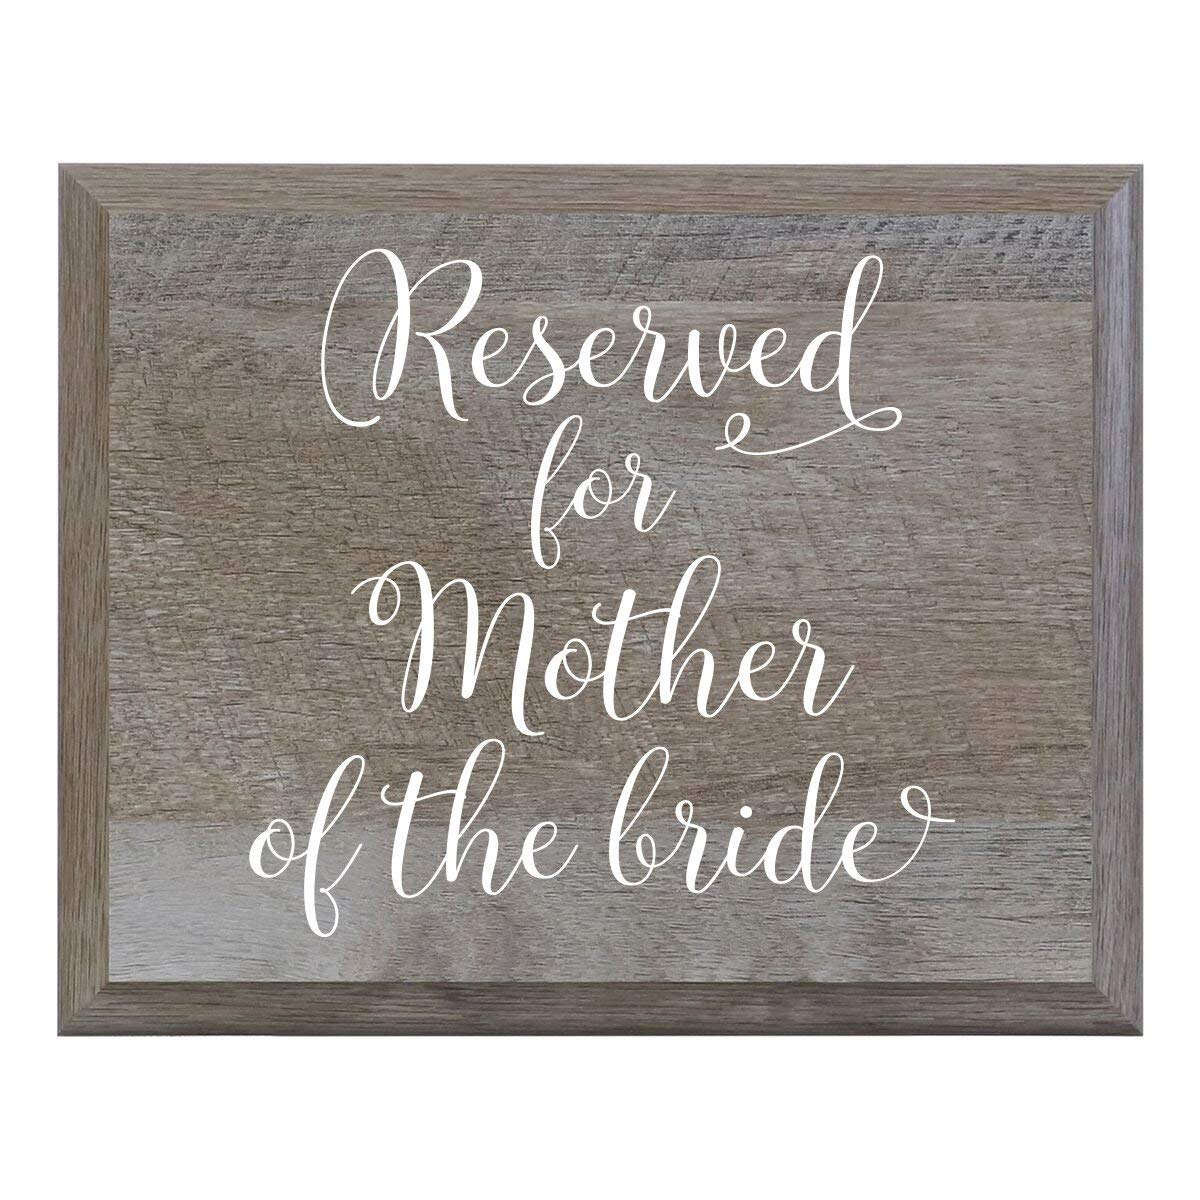 Reserved For Mother Of The Bride Decorative Wedding Party sign (8x10) - LifeSong Milestones